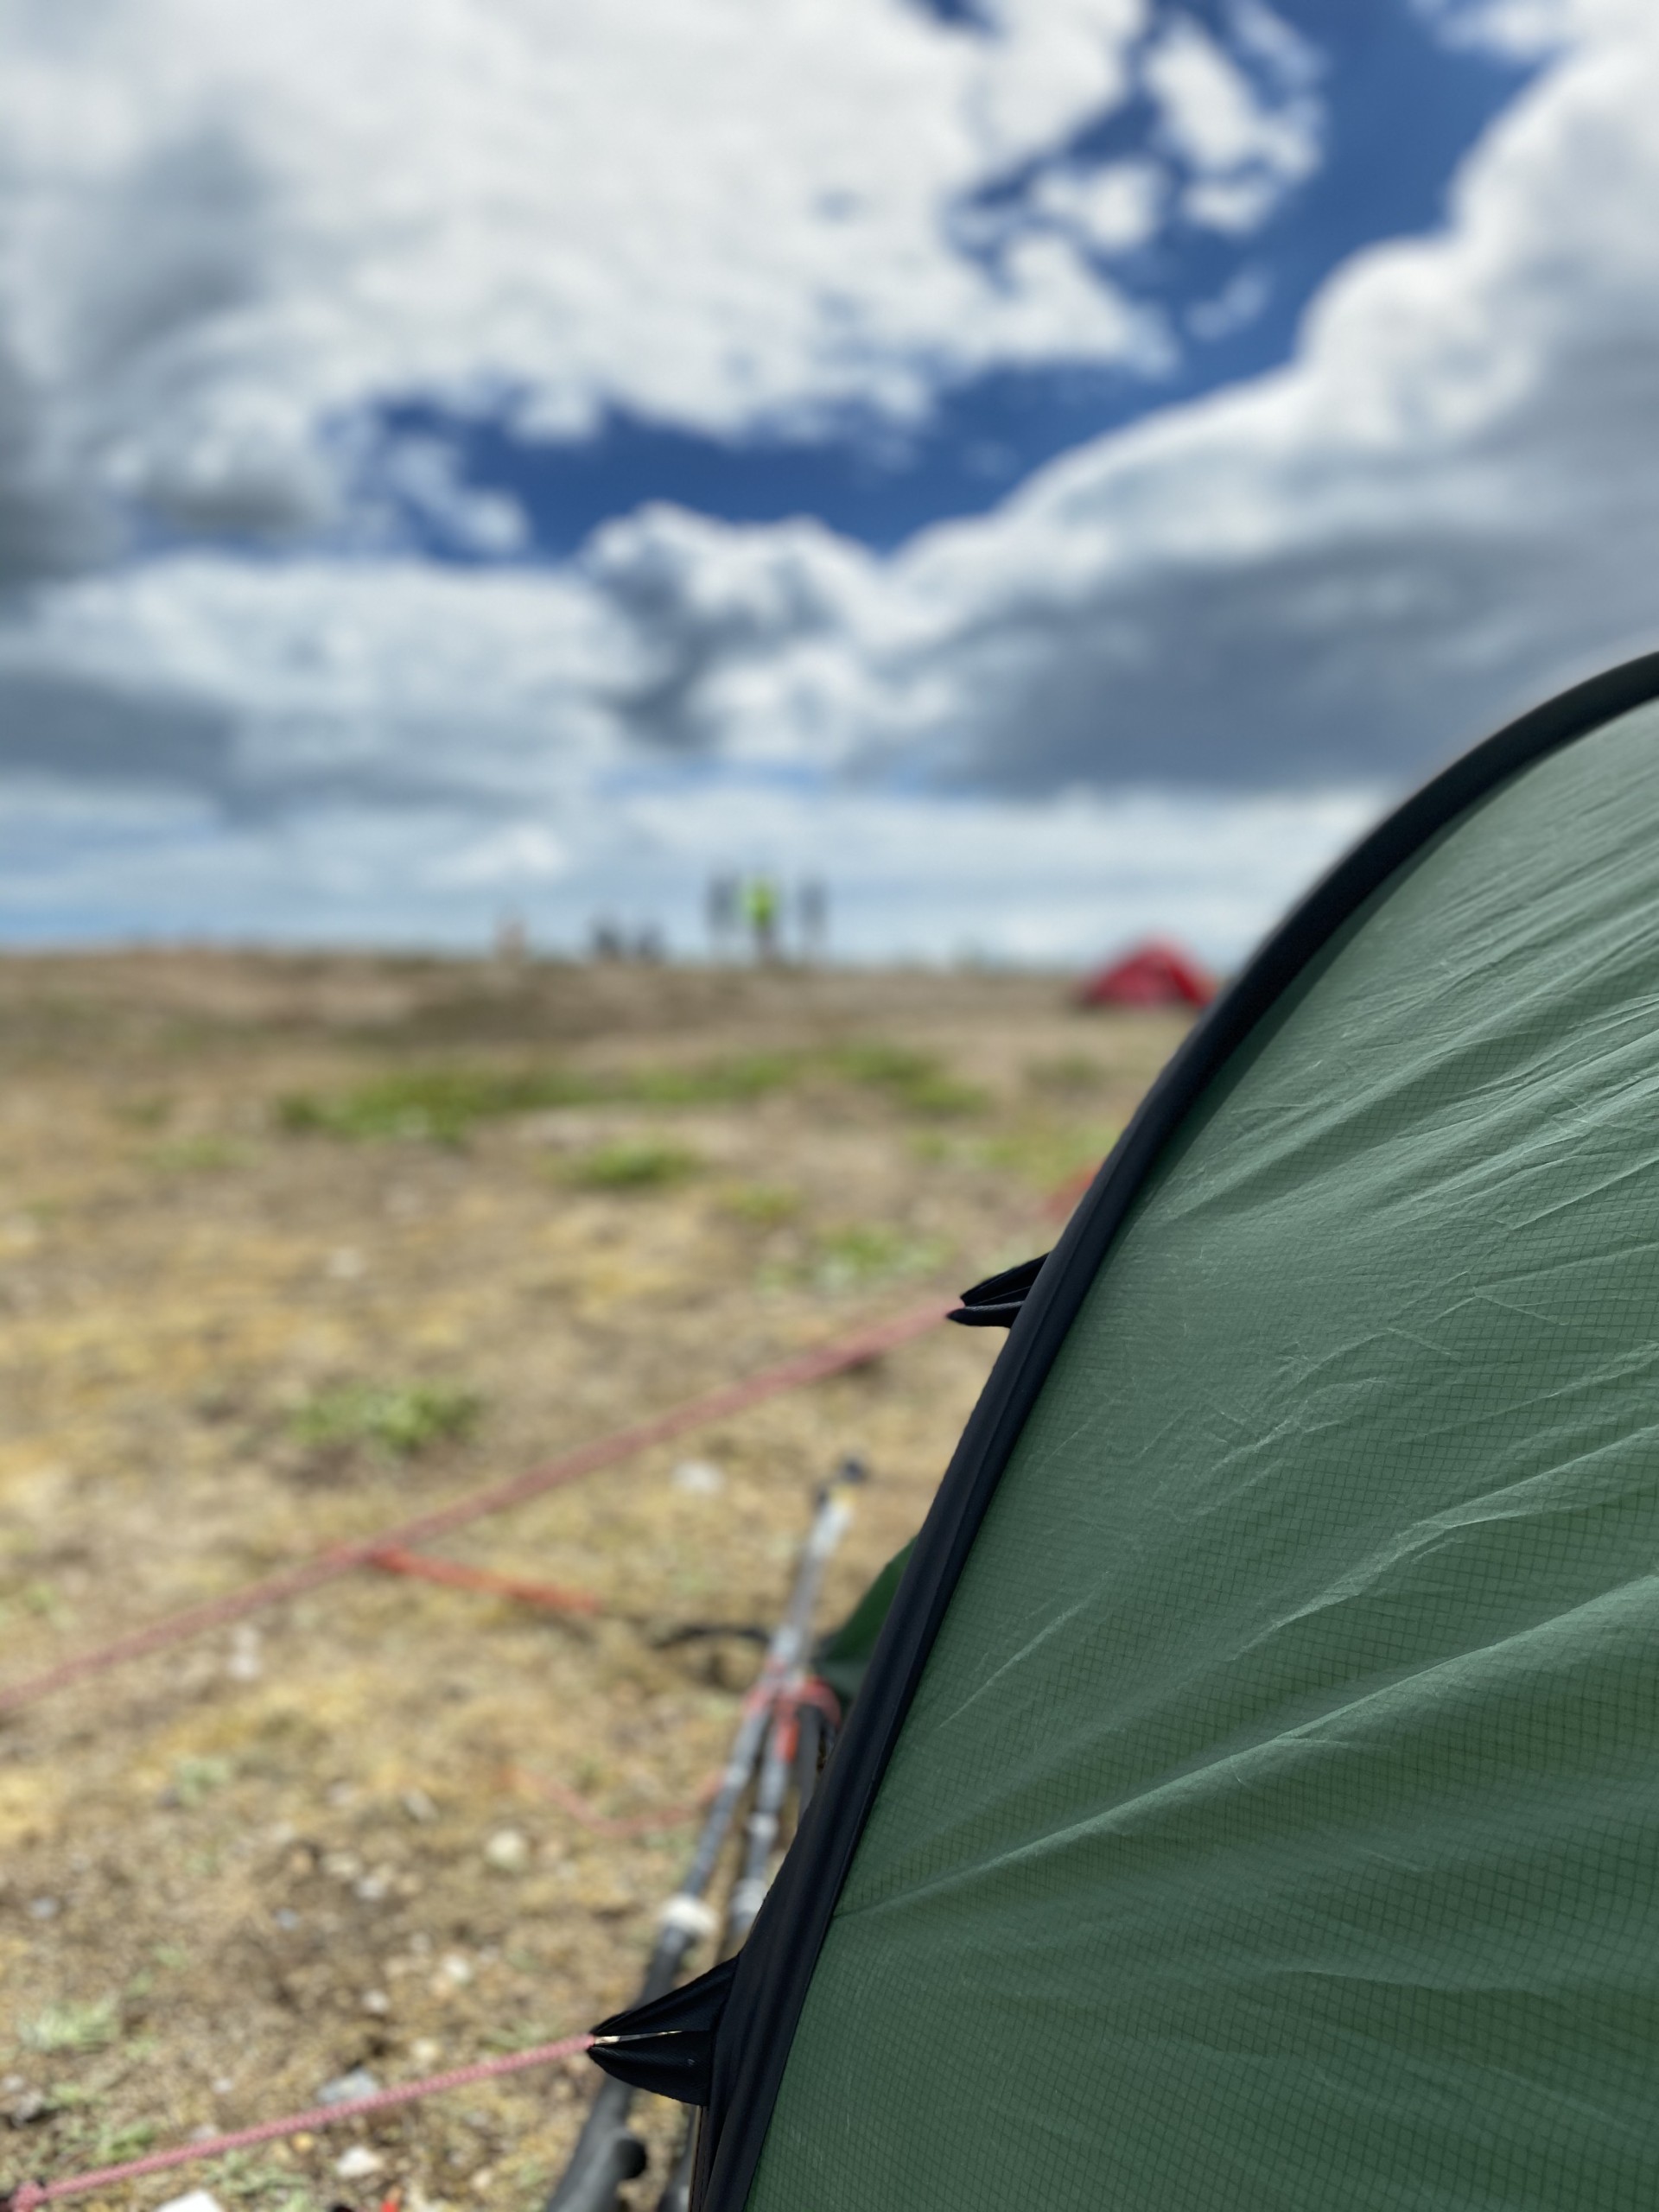 Hilleberg tents and NOMAD Sea Kayaking.